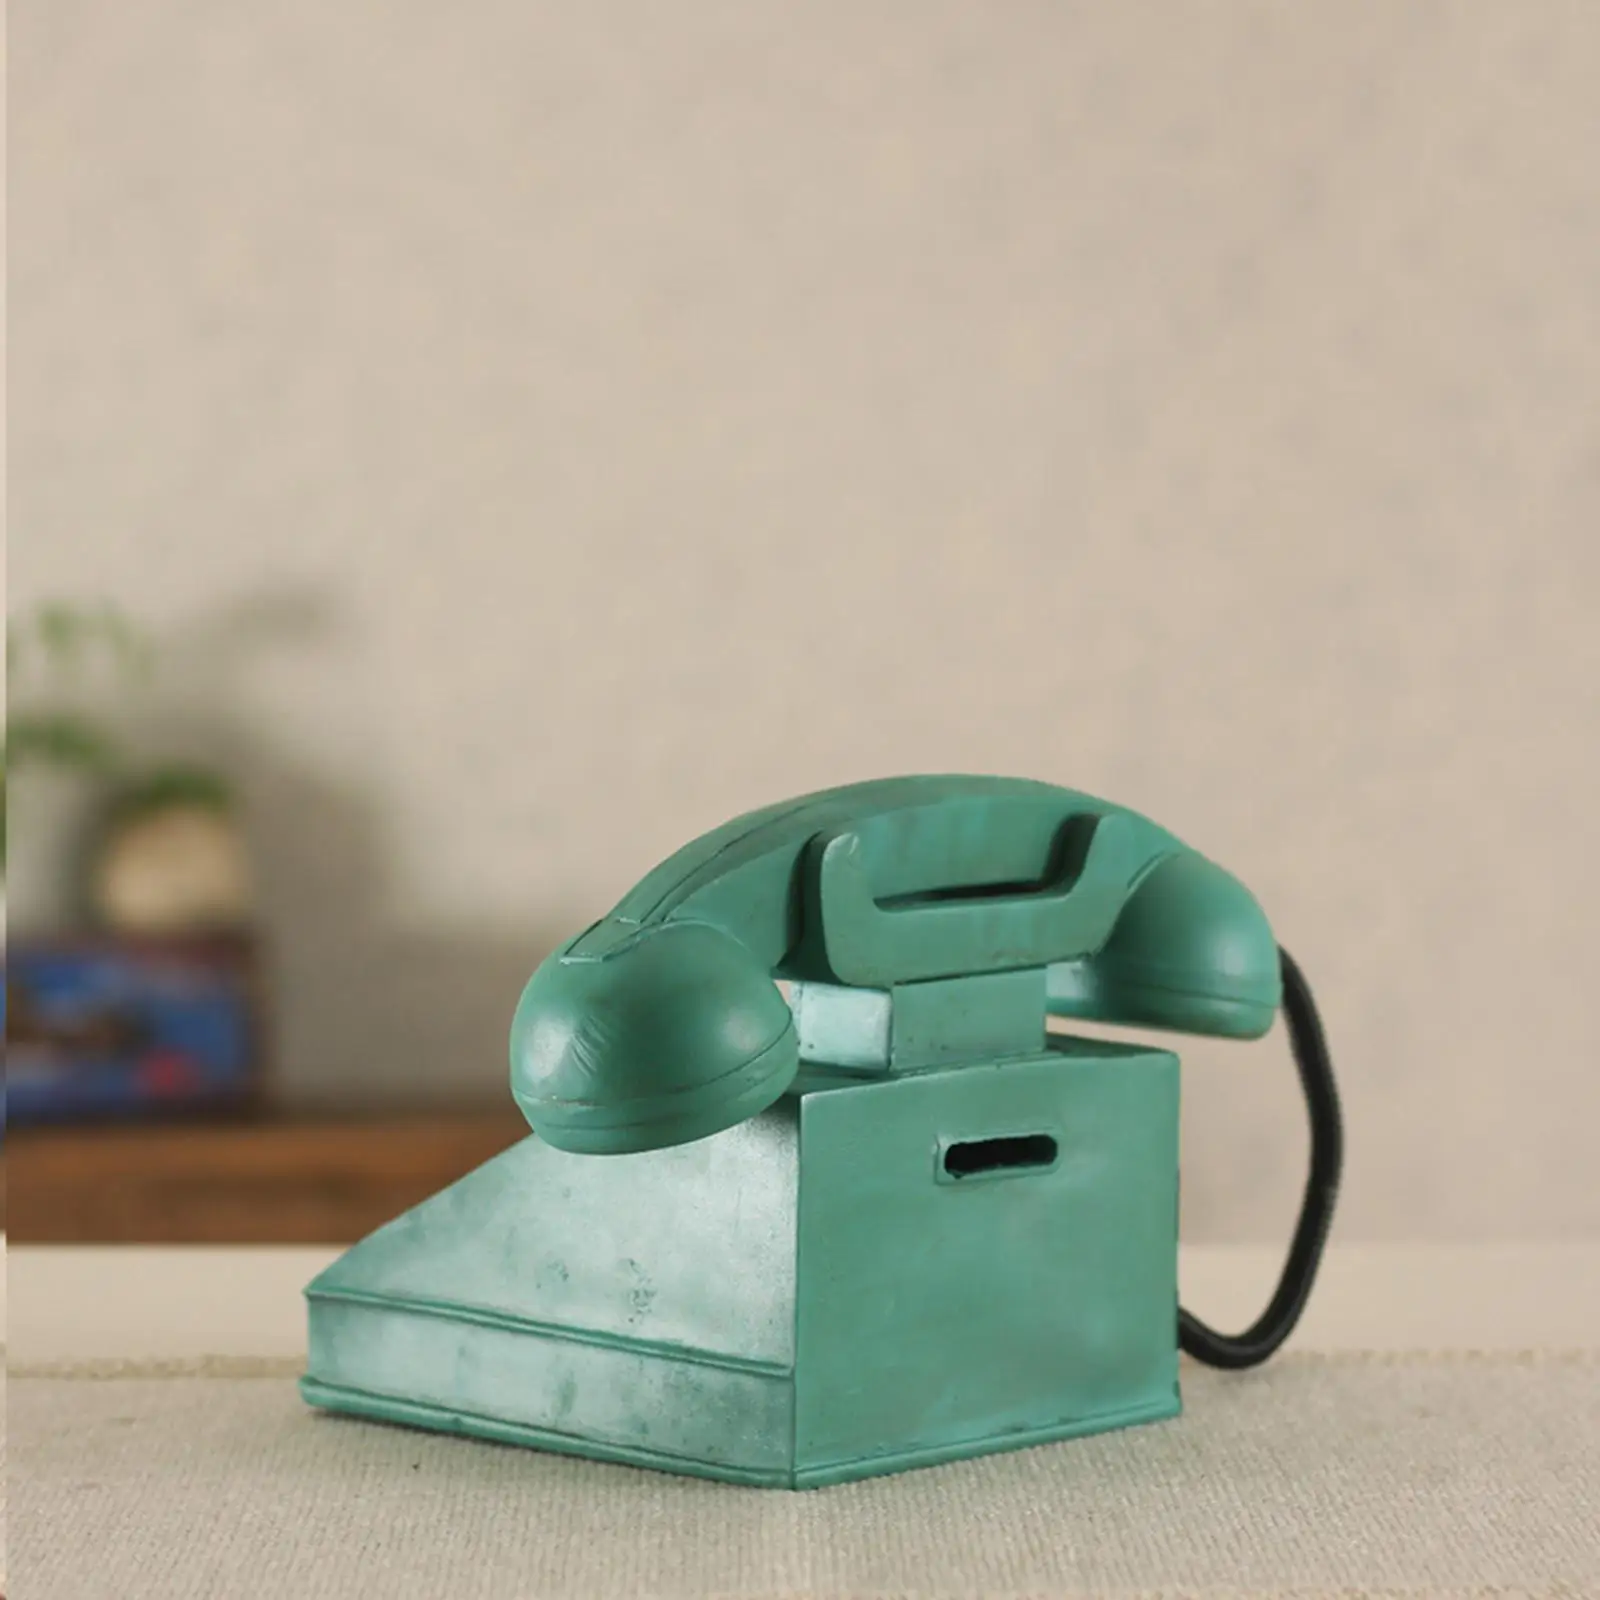 Retro Style American Telephone Model Figurine for Tabletop Store Decoration